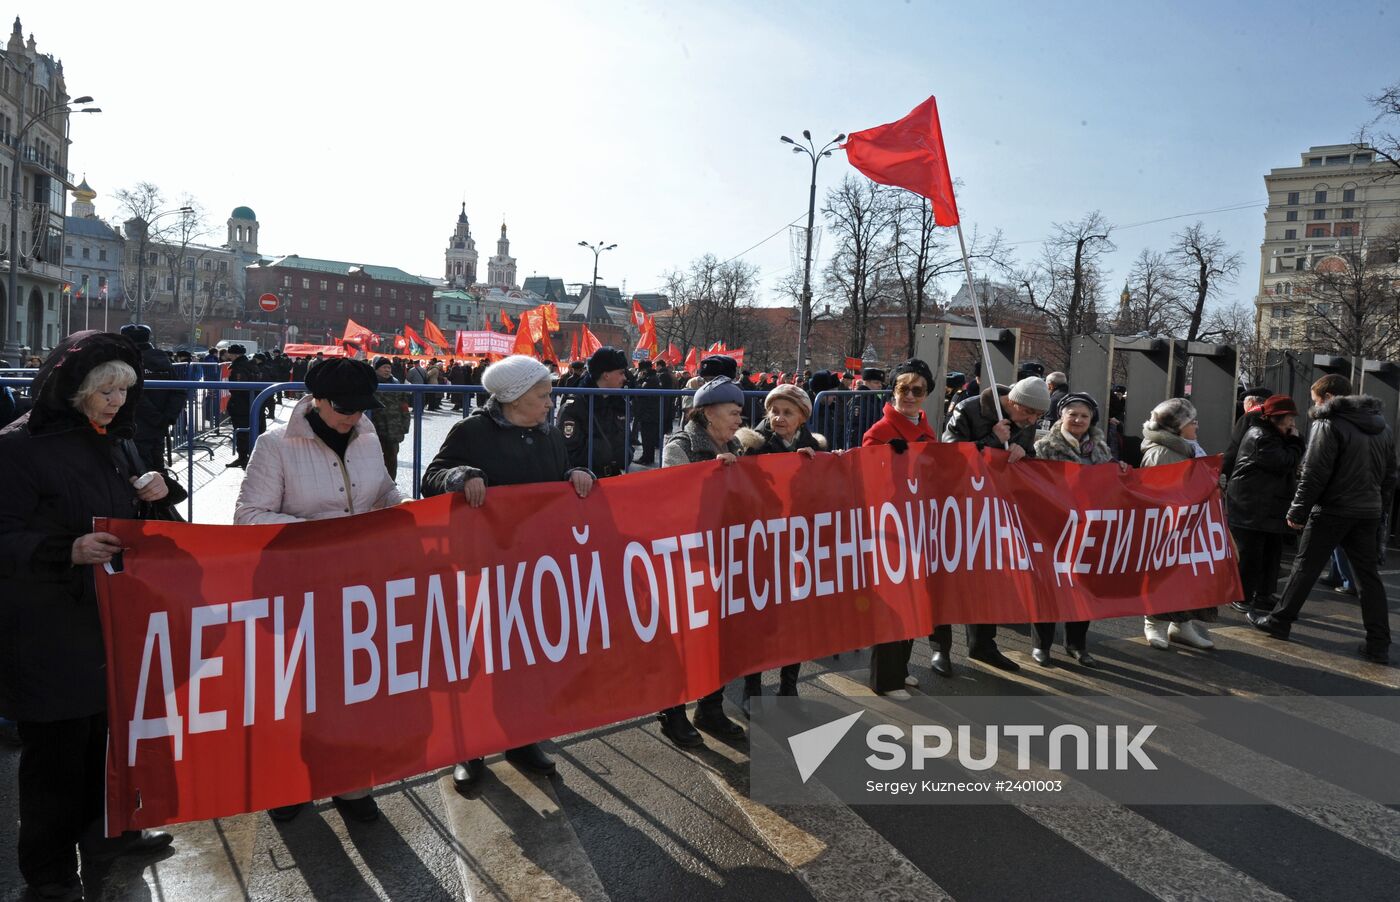 Rally to support results of referendum in Crimea